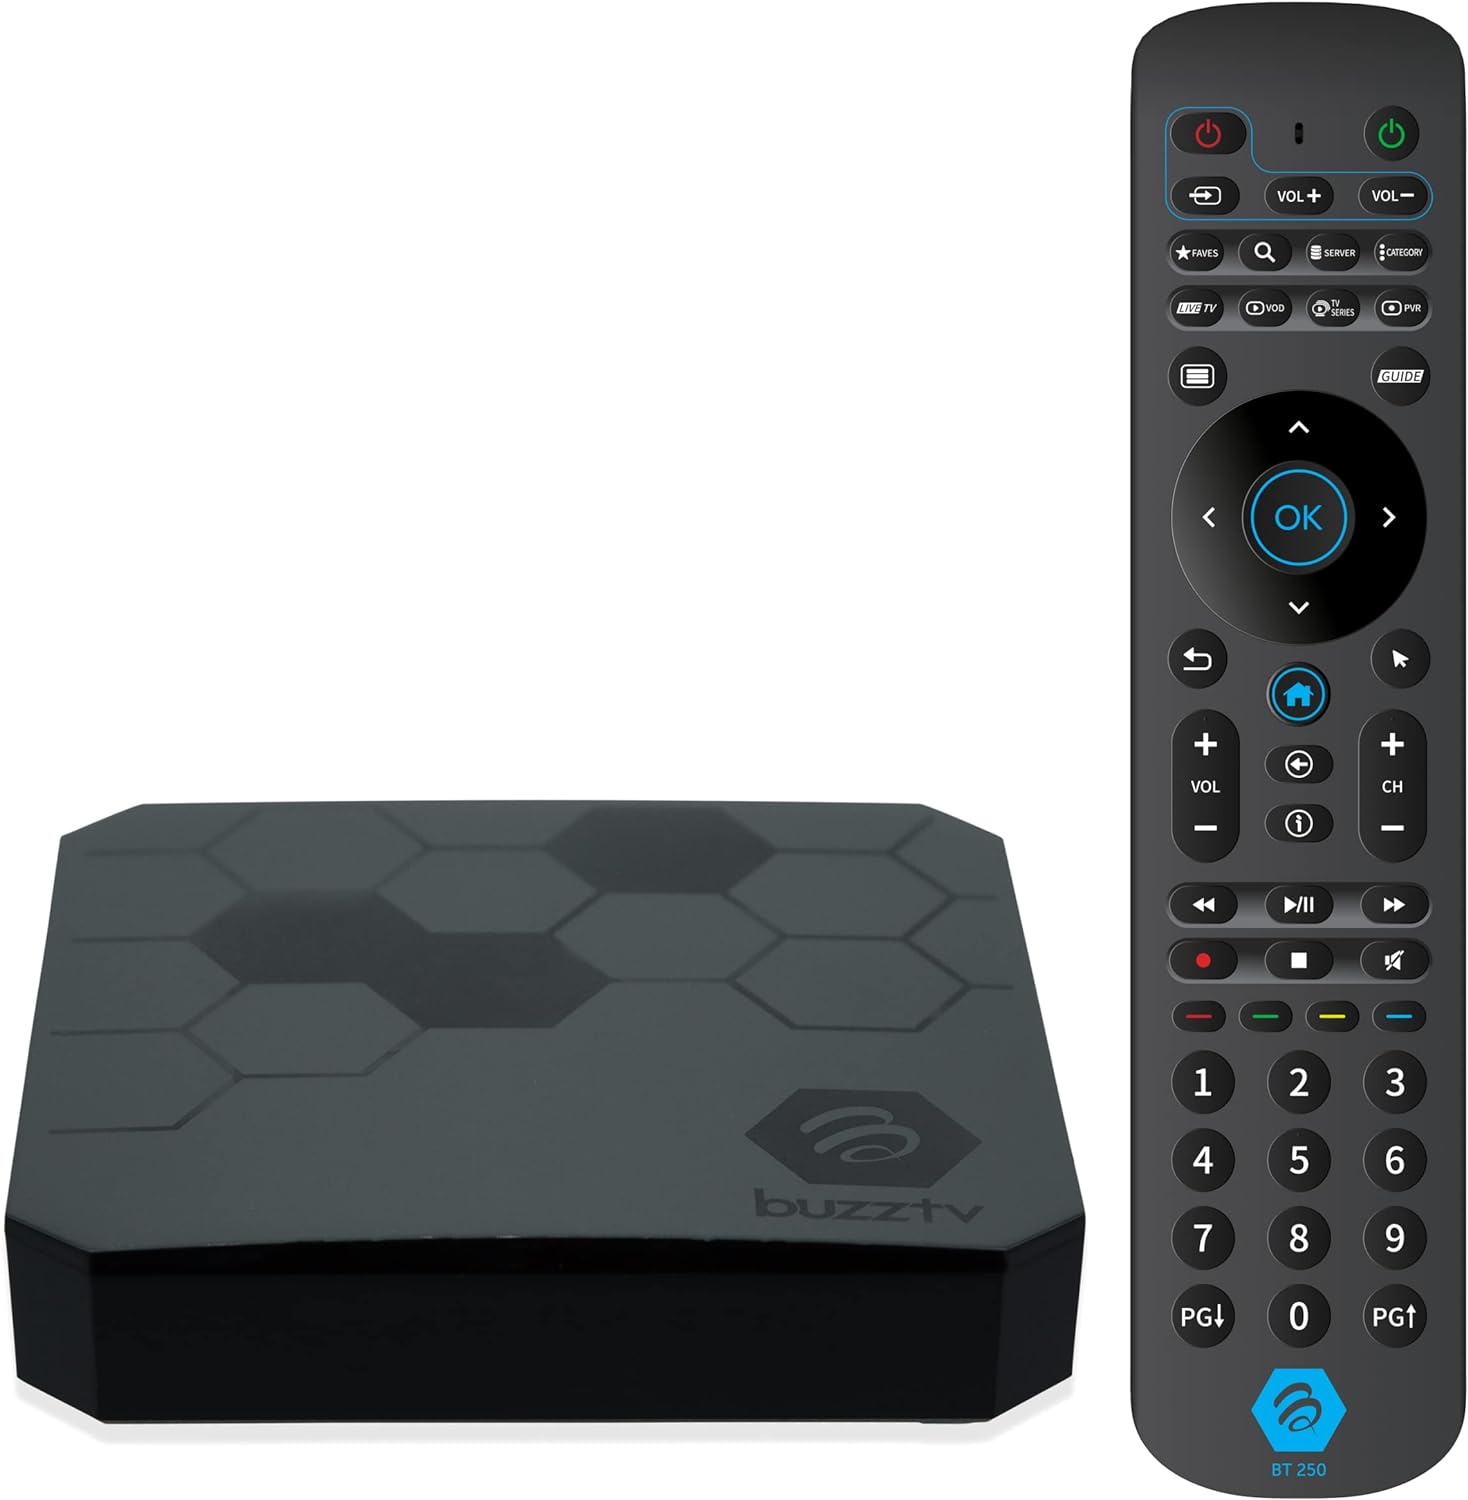 The BuzzTV Classic is a versatile and future-proof Android TV Box that offers a wide range of features and capabilities.